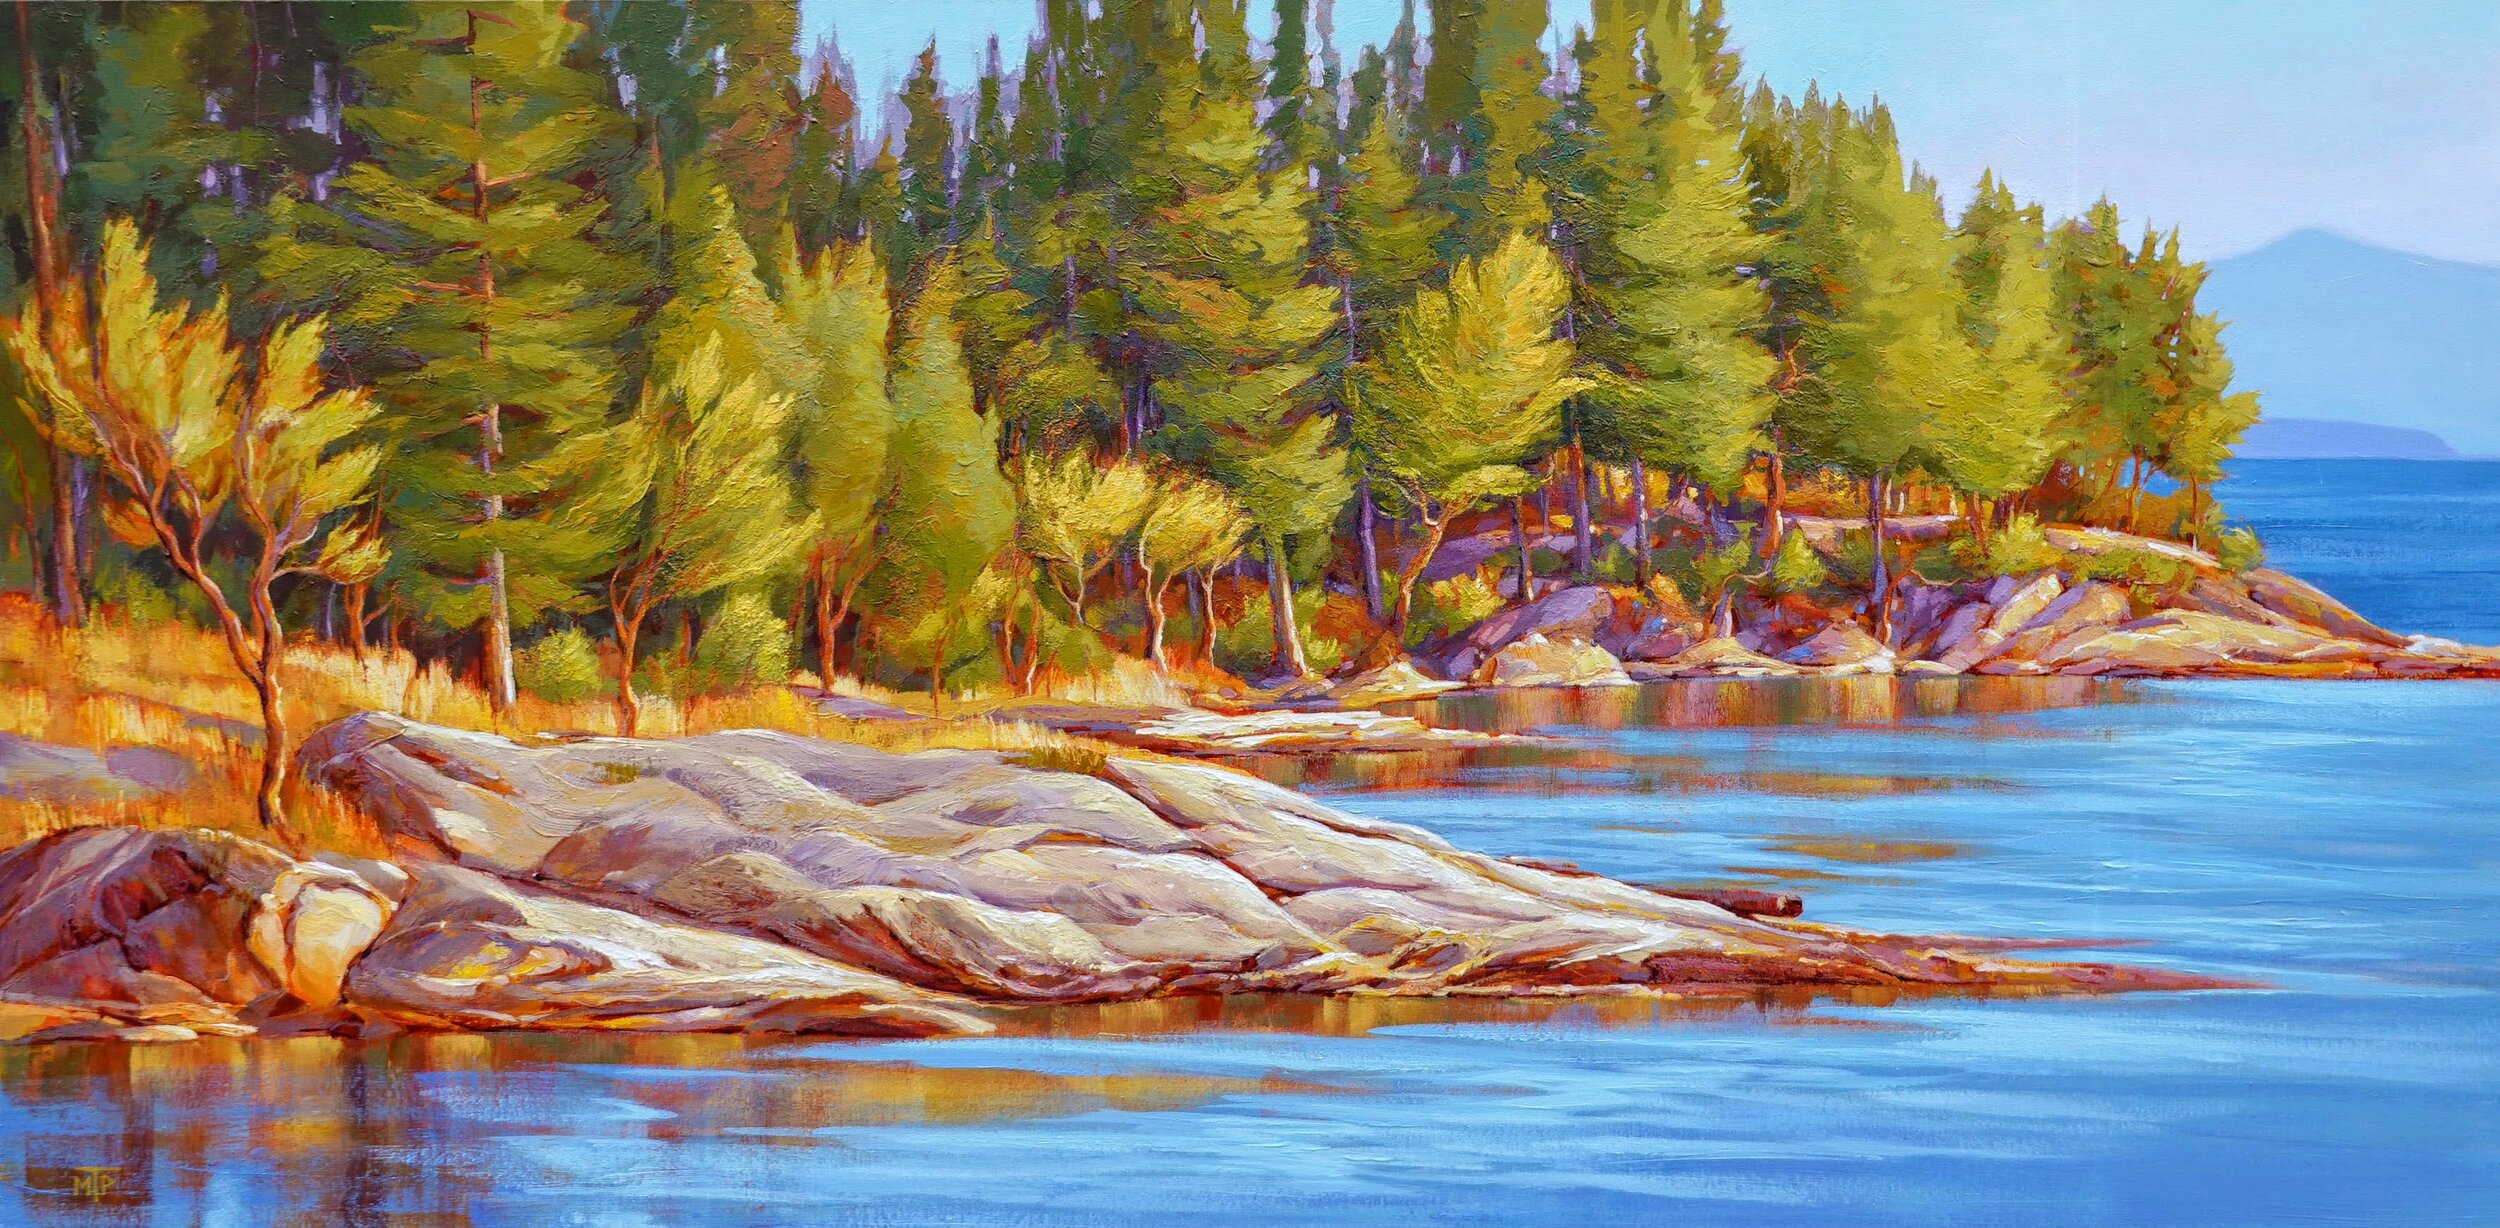  Salt Spring Summer    Acrylic on canvas, 30x60 inches, Sold  